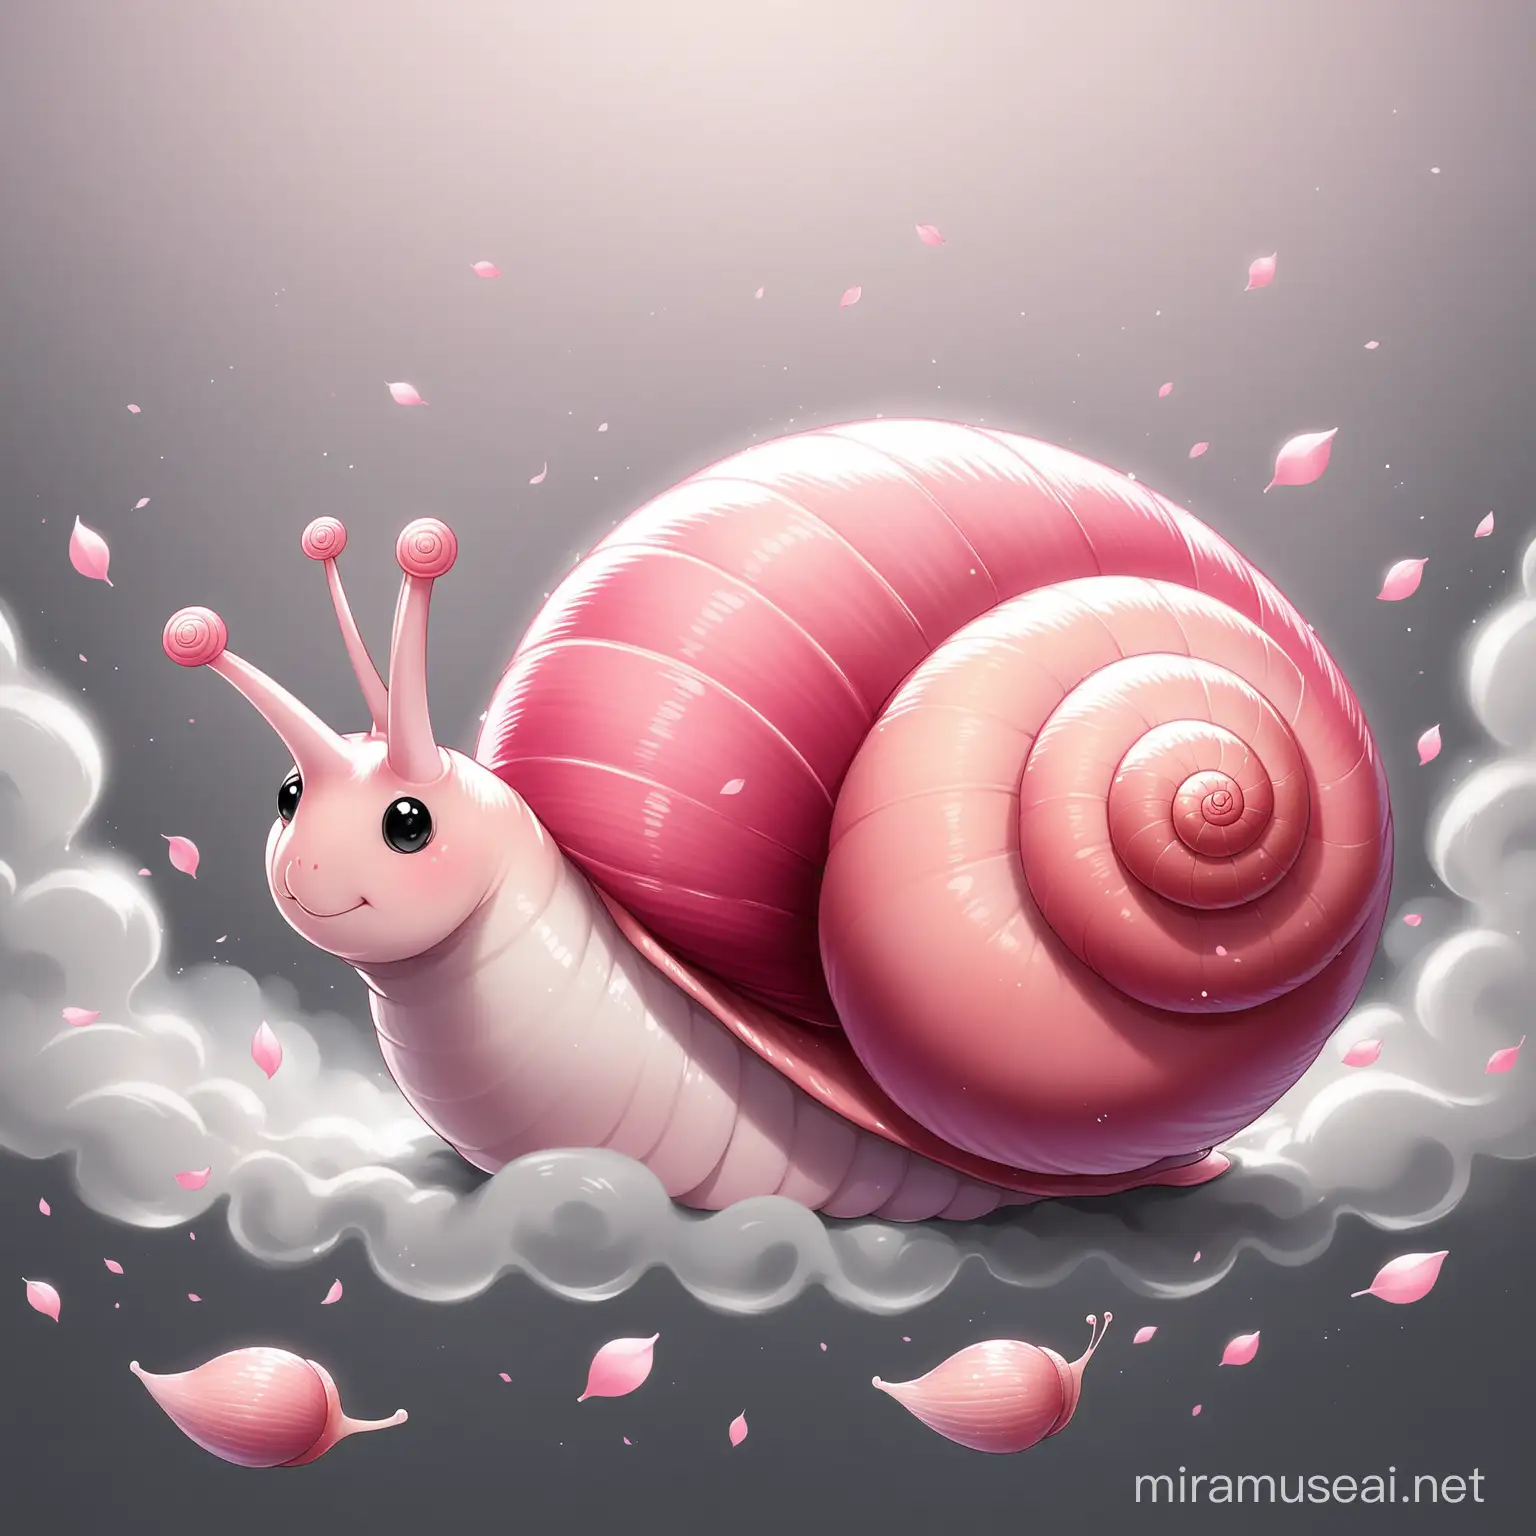 A cute pink snail against a background of grey smoke and pink falling petals